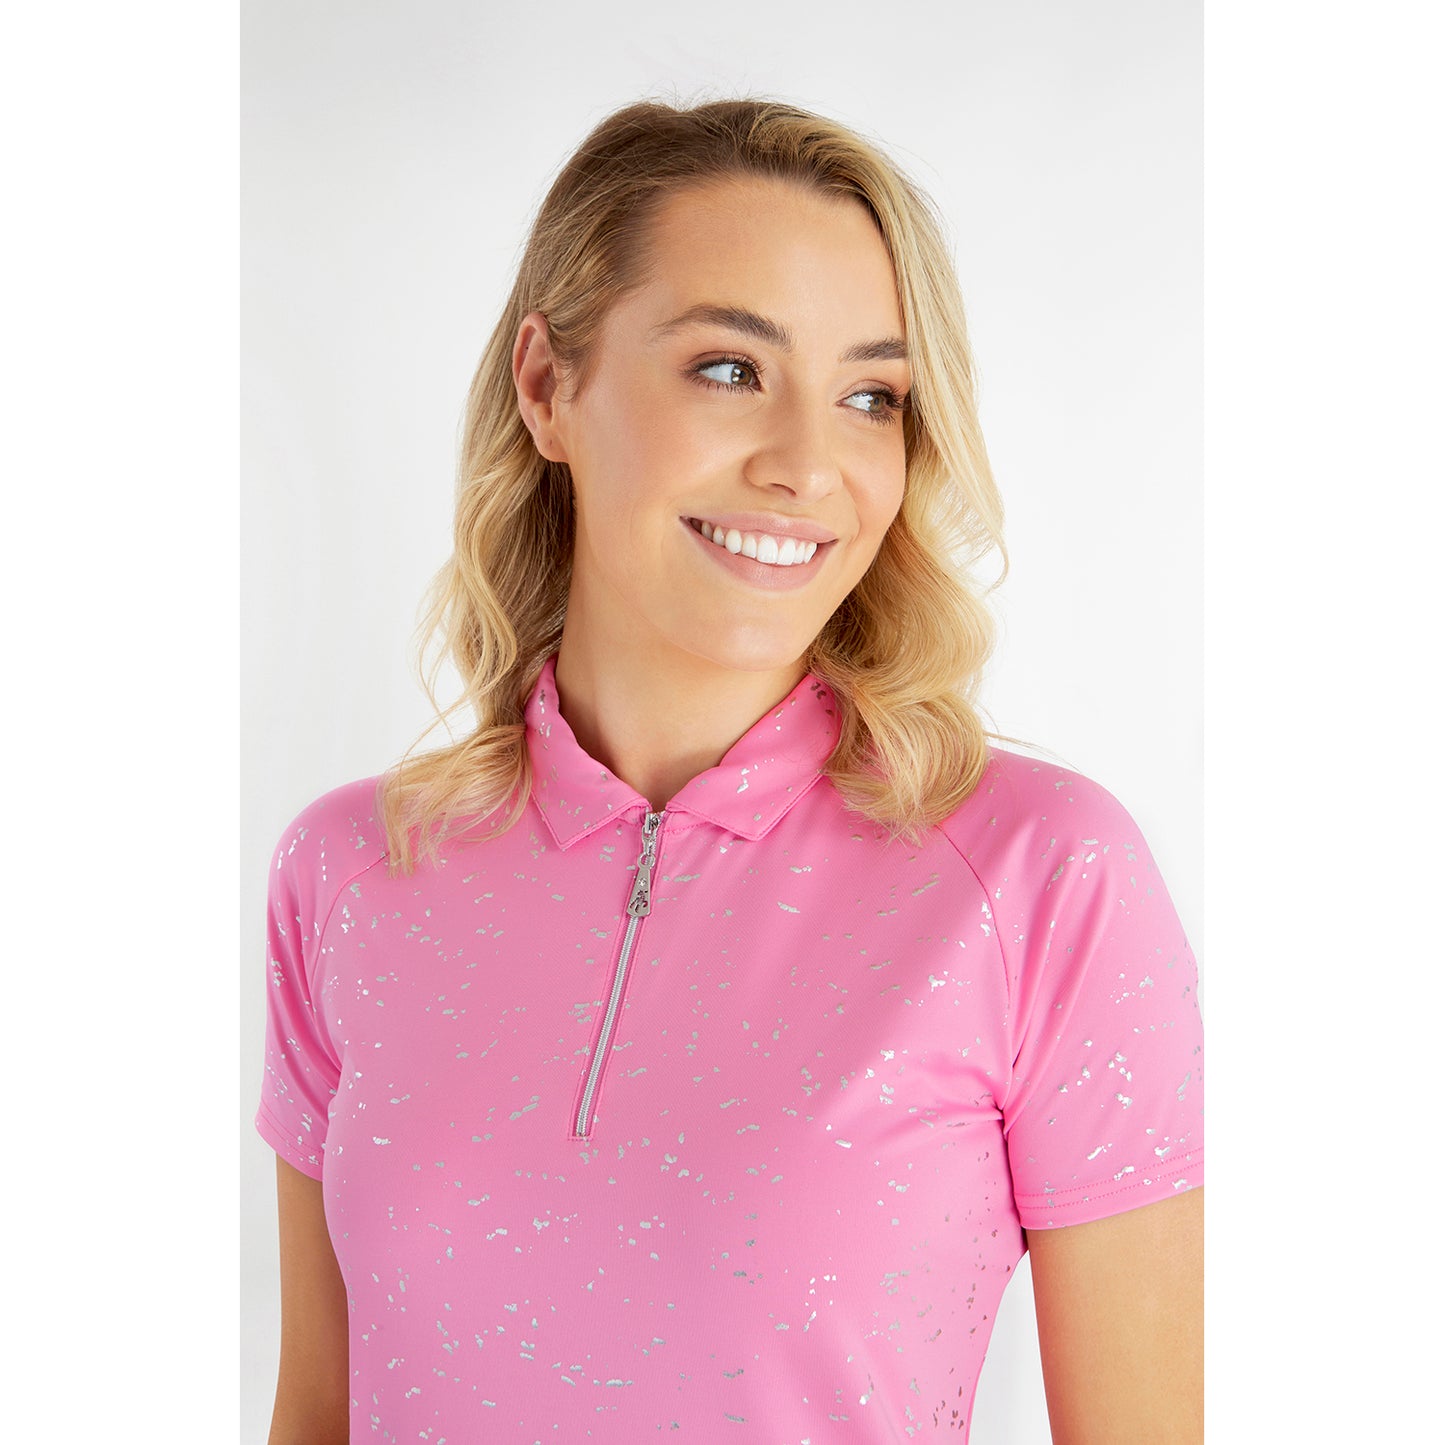 Green Lamb Ladies Zip-Neck Short Sleeve Polo Shirt with Silver Foil Print in Candy